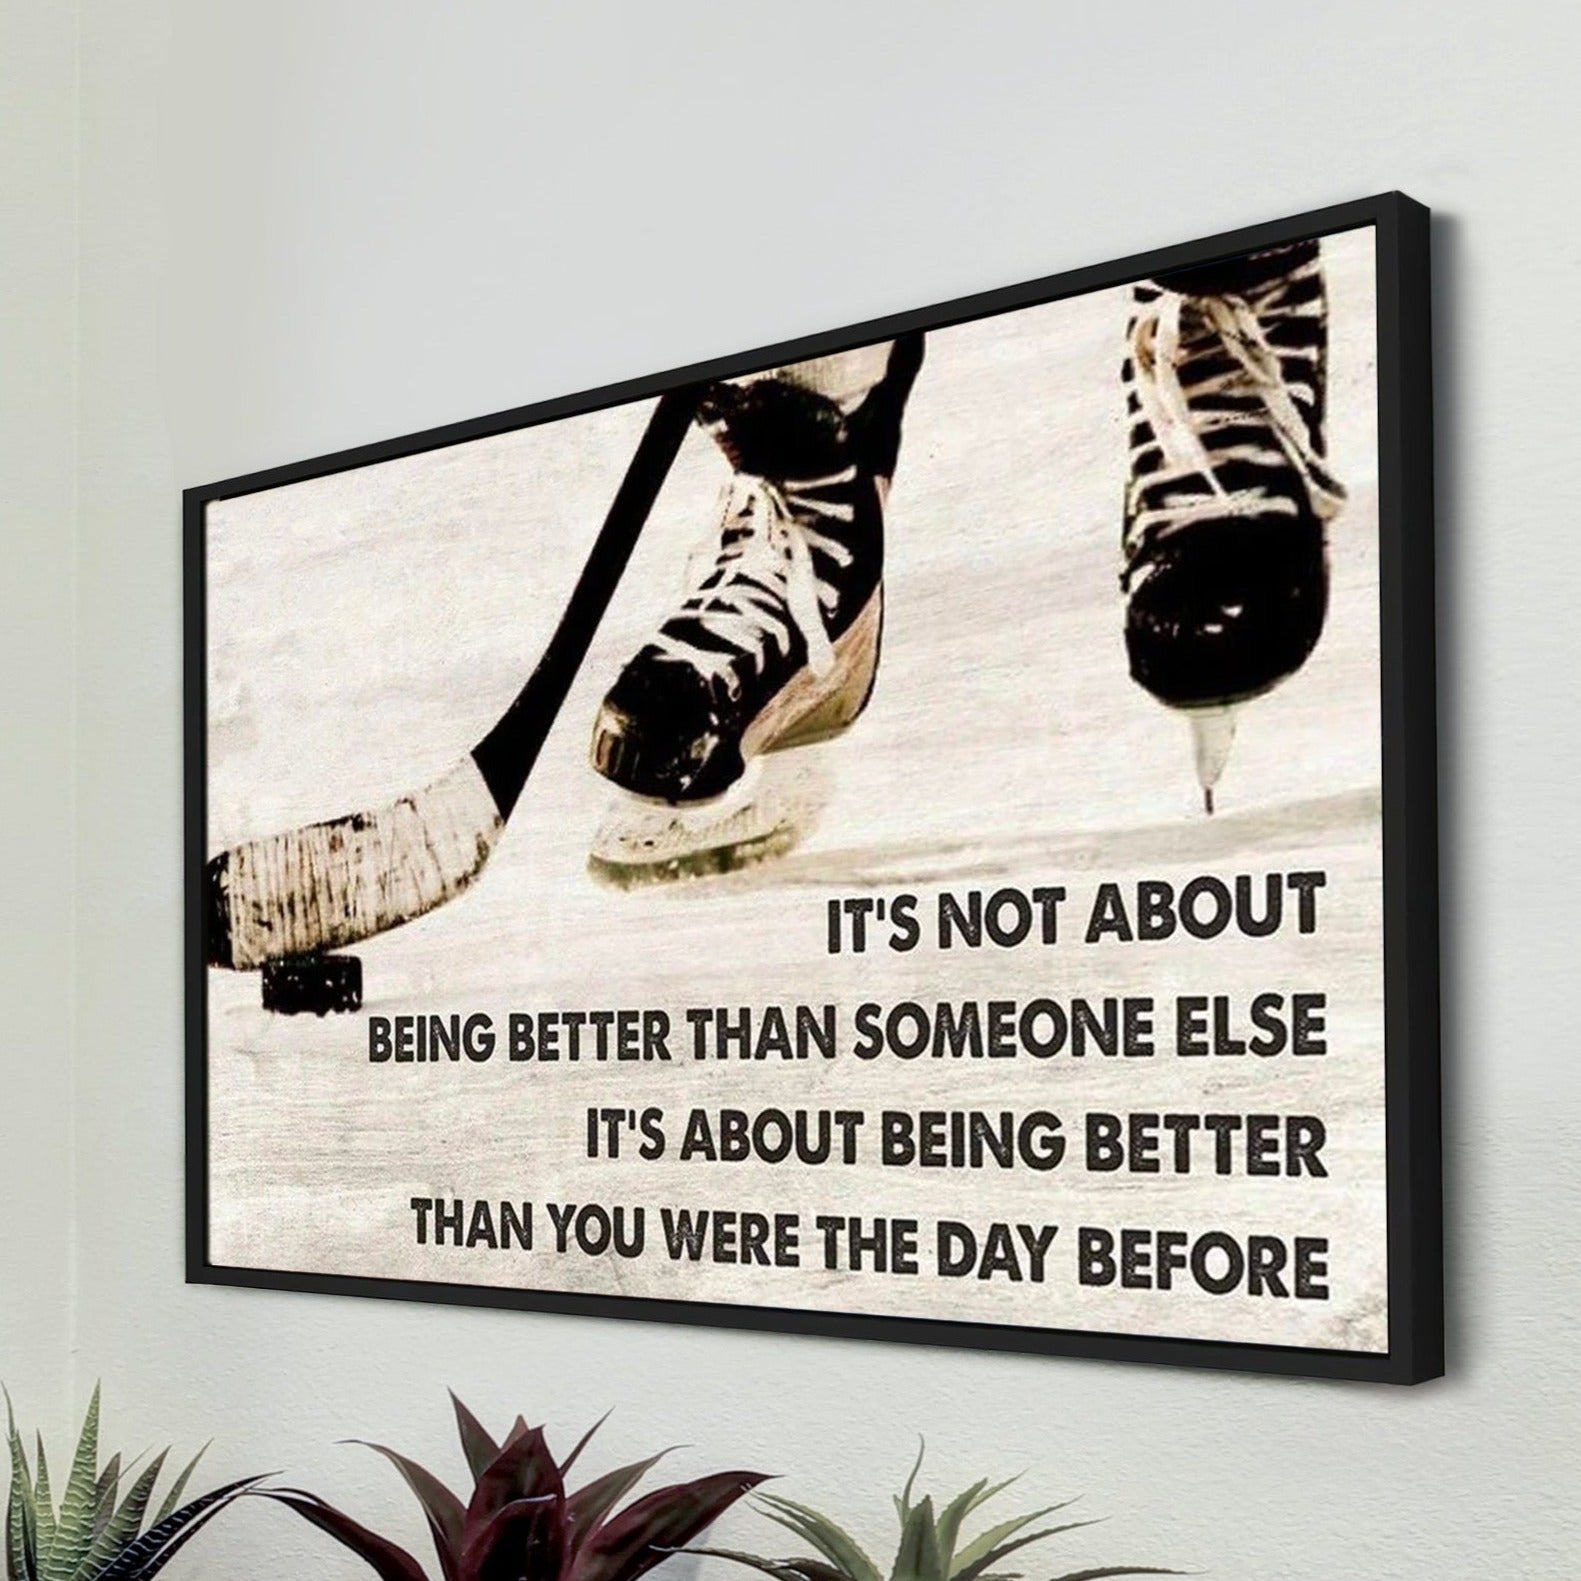 Squash Ball customizable poster canvas - It is not about better than someone else, It is about being better than you were the day before